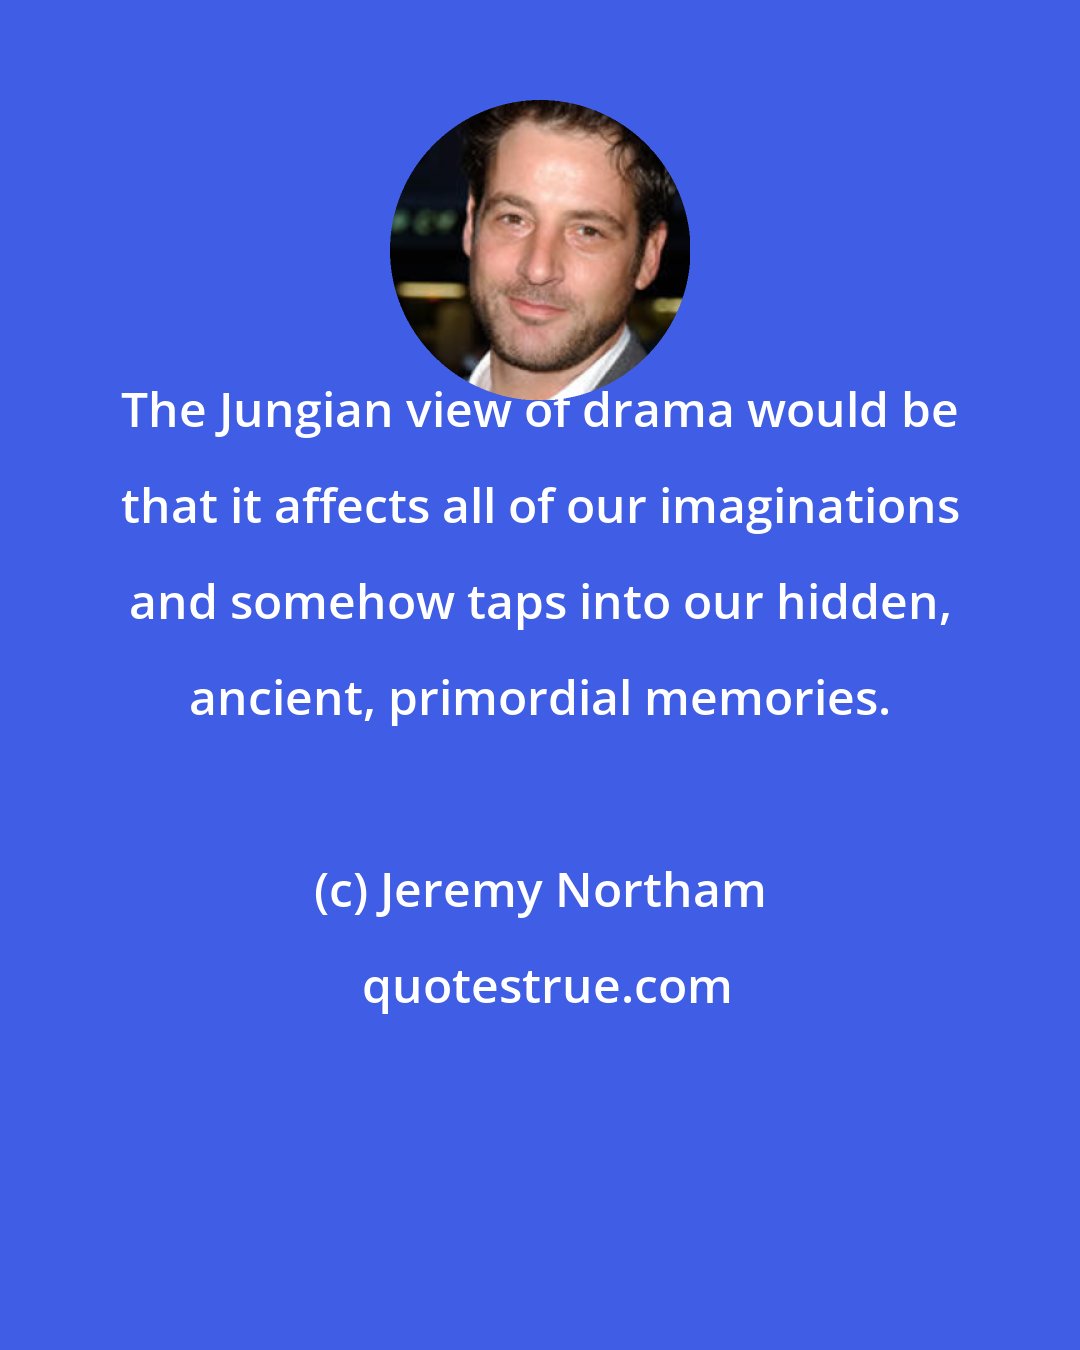 Jeremy Northam: The Jungian view of drama would be that it affects all of our imaginations and somehow taps into our hidden, ancient, primordial memories.